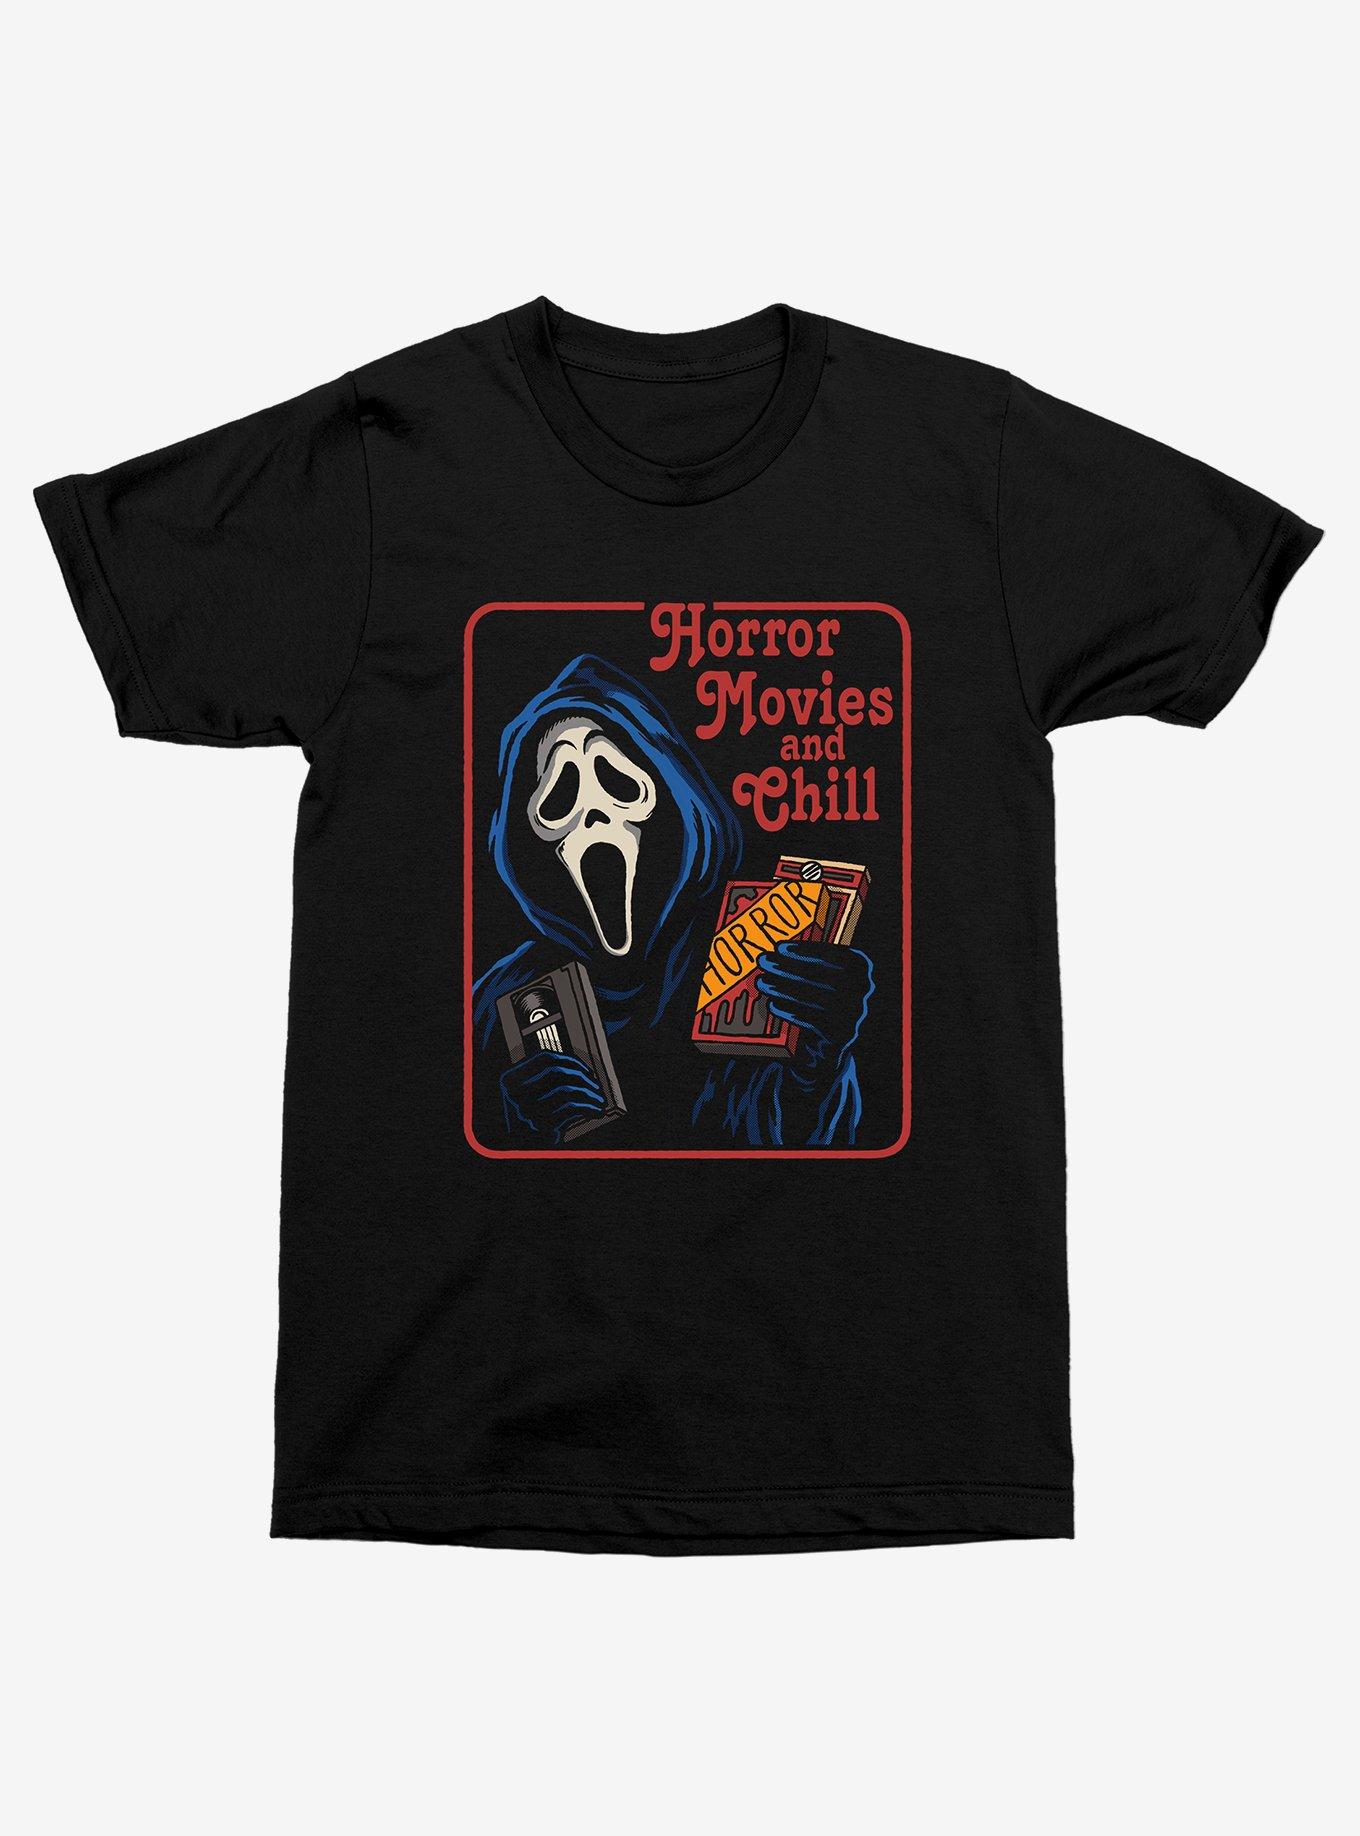 Scream Ghost Face Horror Movies & Chill T-Shirt, BLACK, hi-res